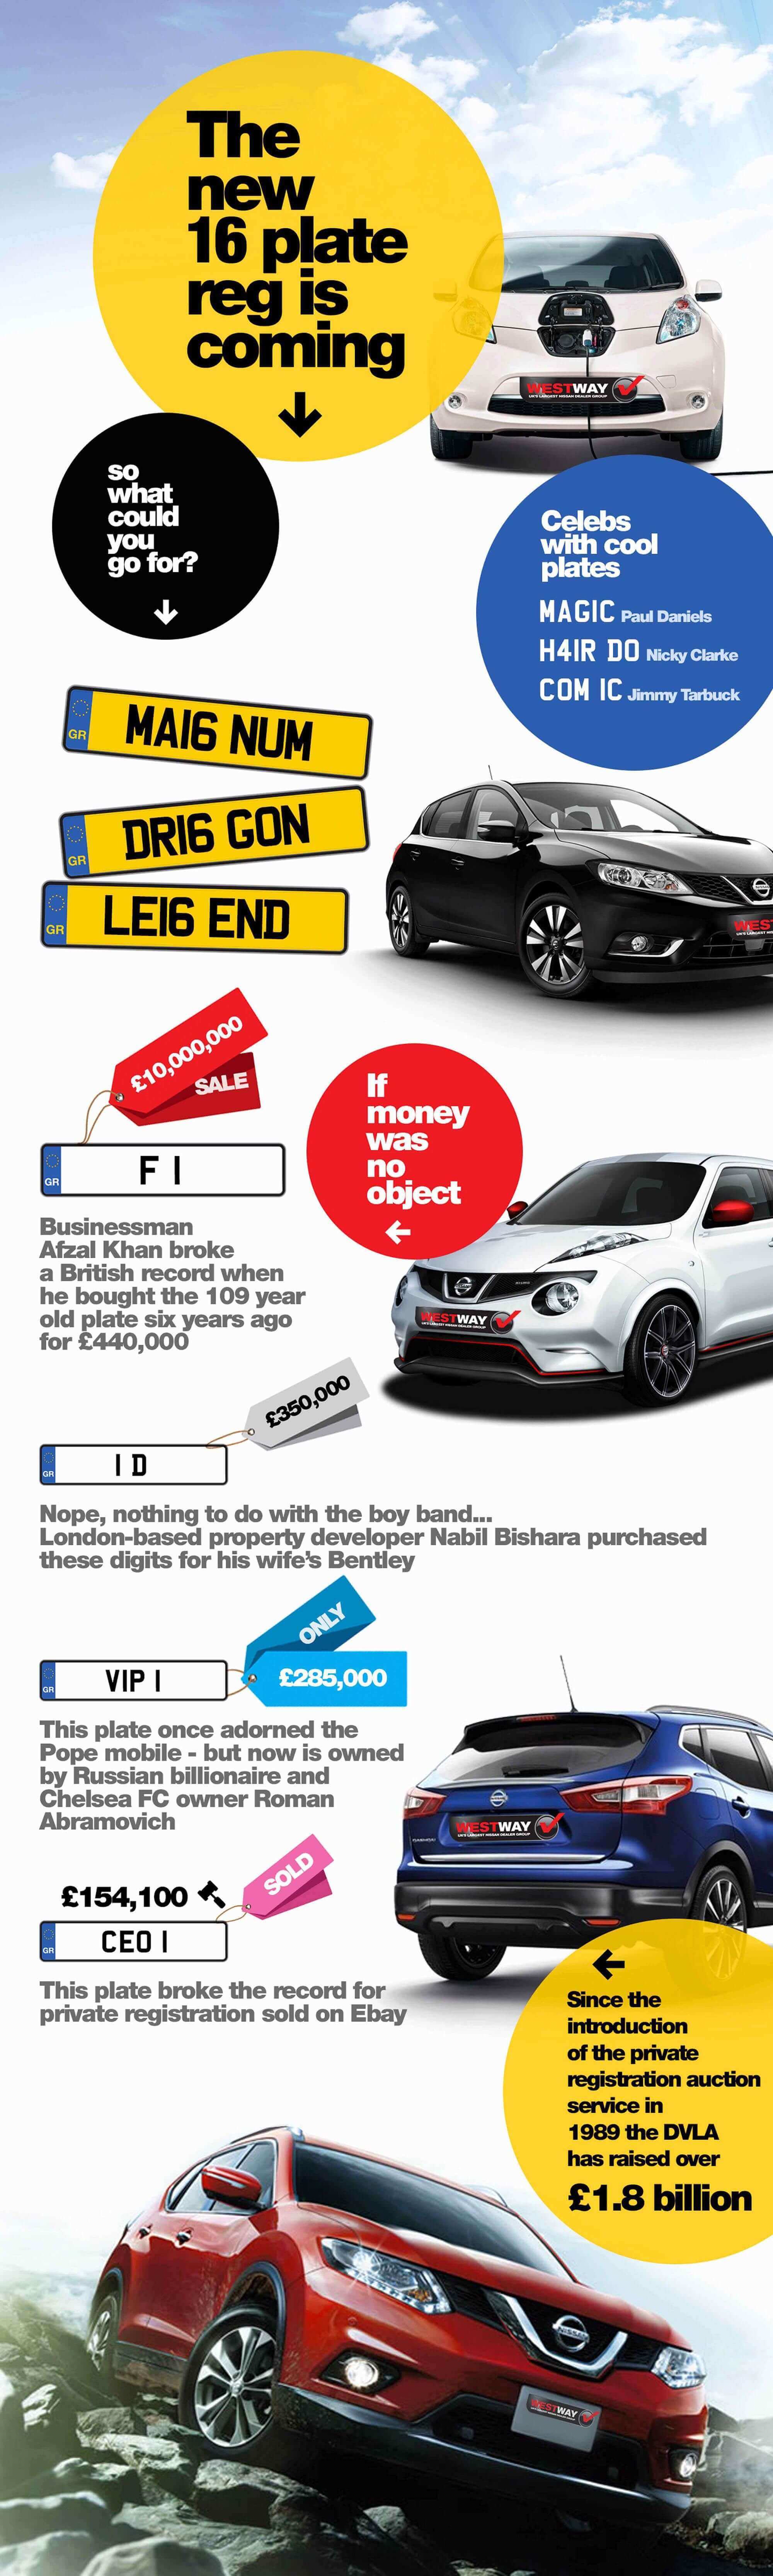 New 2016 Reg Plate Infographic